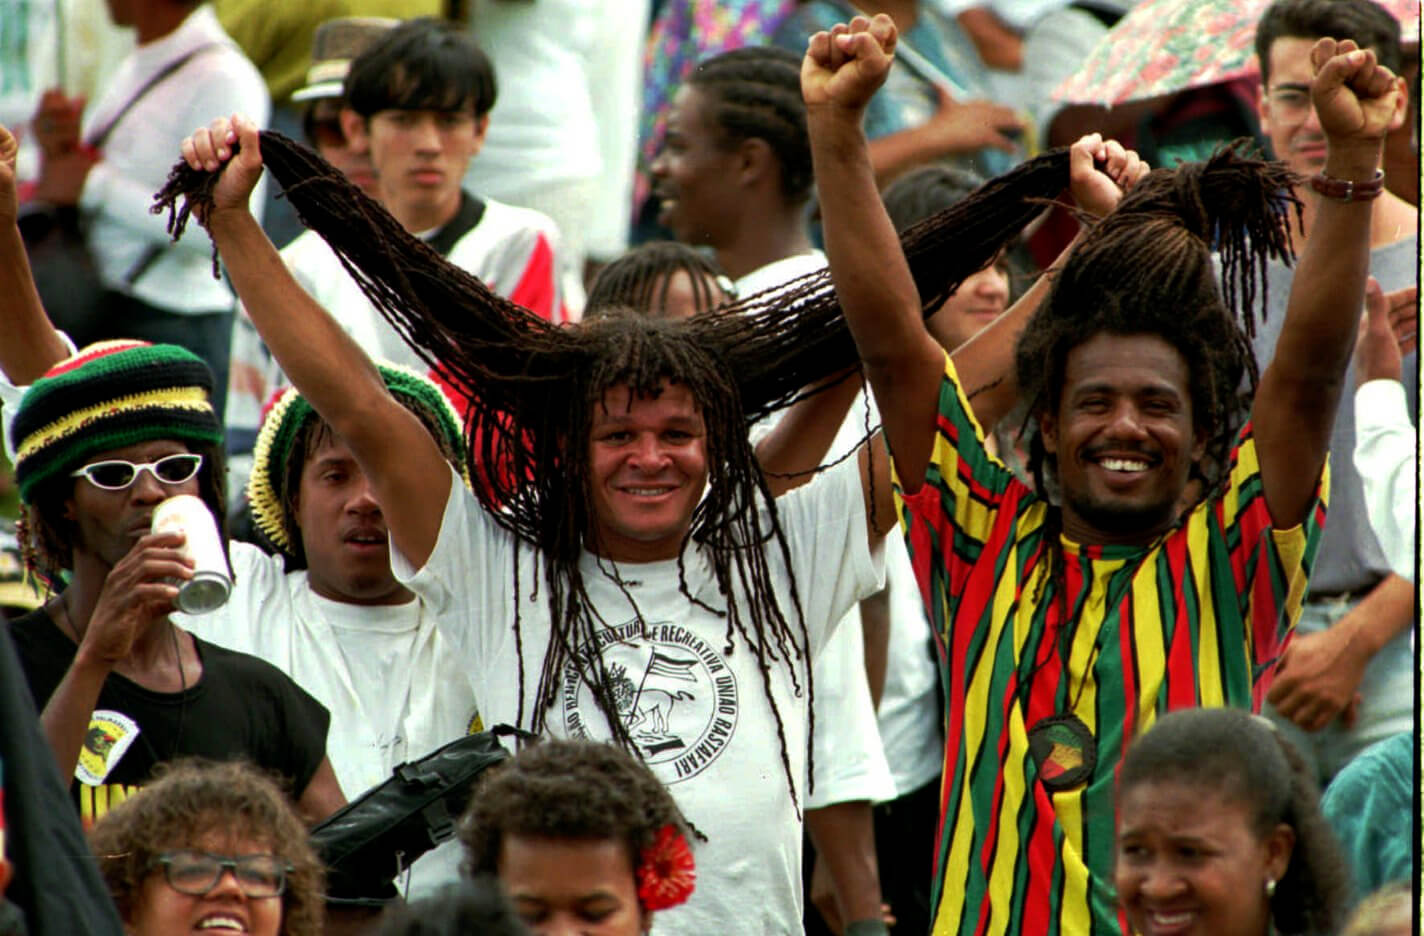 Human rights marchers participate in a march against racism, in Brasilia, Brazil, November 20, 1995. Thousands participated in the march against racism and oppression Monday in remembrance of the 300 years since the 17th century hero of the black movement in Brazil, "Zumbi de los Palmares' ,'" fight against oppression. Eraldo Peres | AP